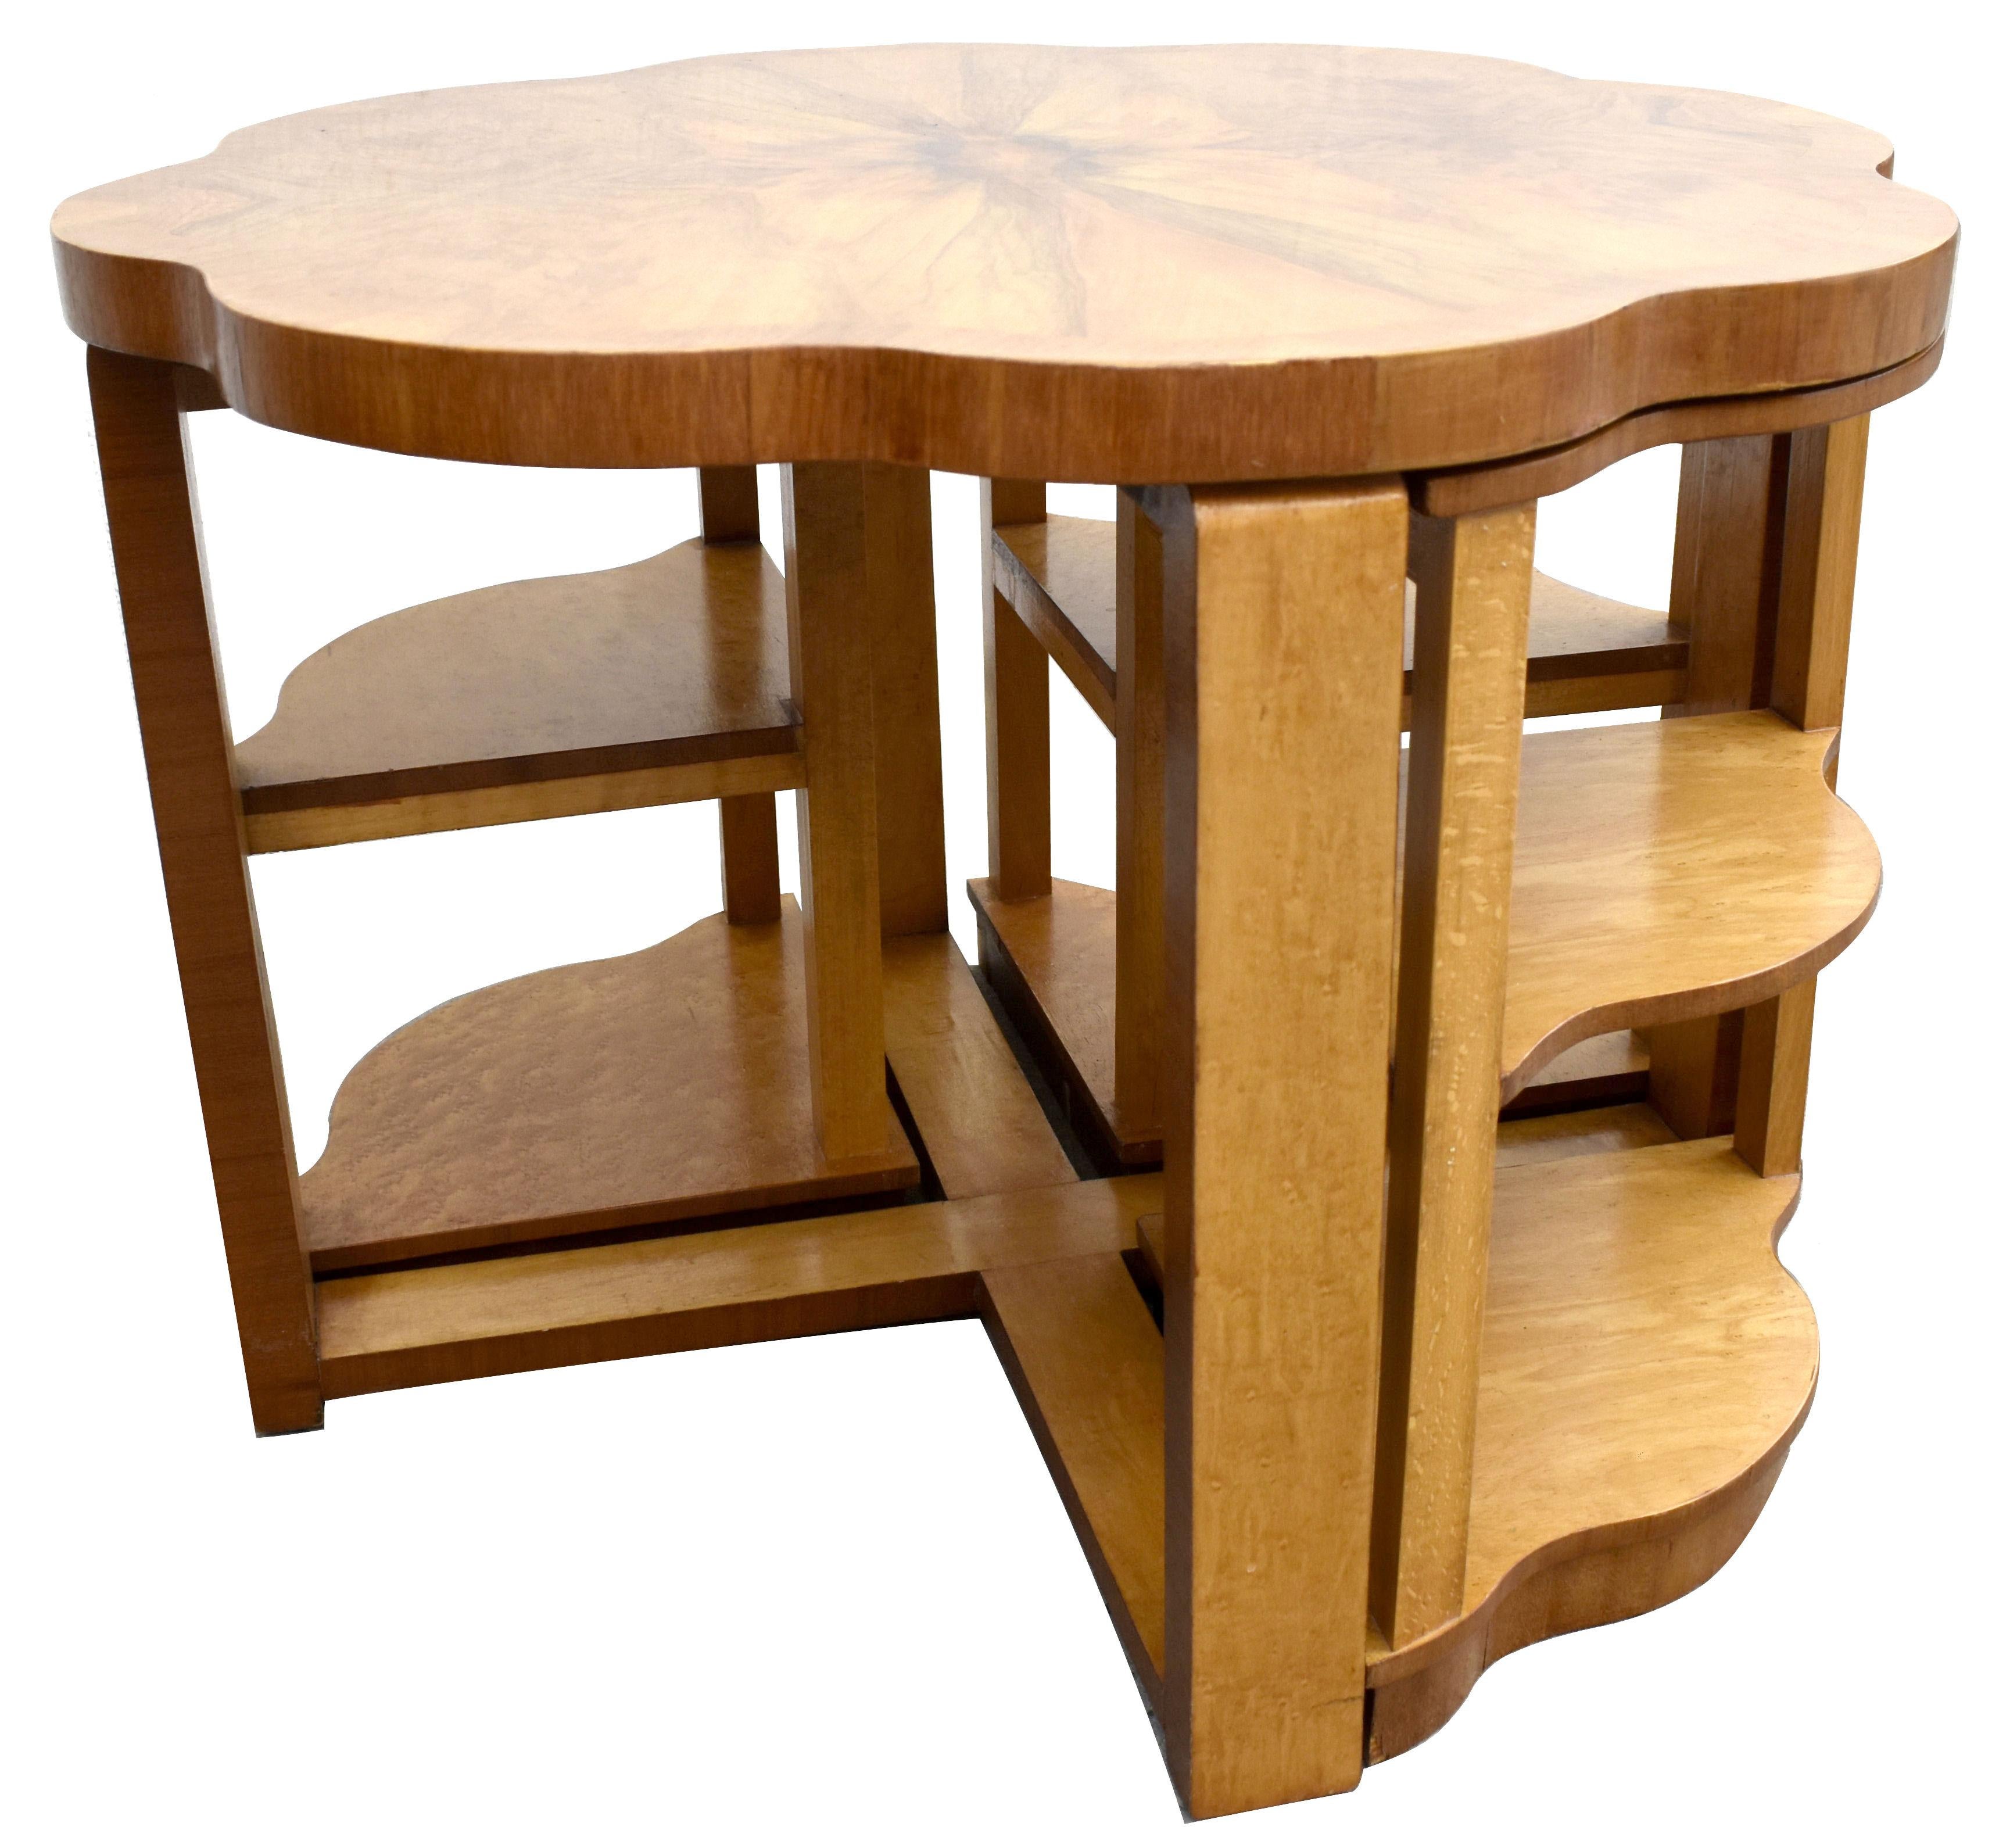 Art Deco High Quality Walnut & Maple Nest of 5 Tables by Epstein, English, 1930 For Sale 1